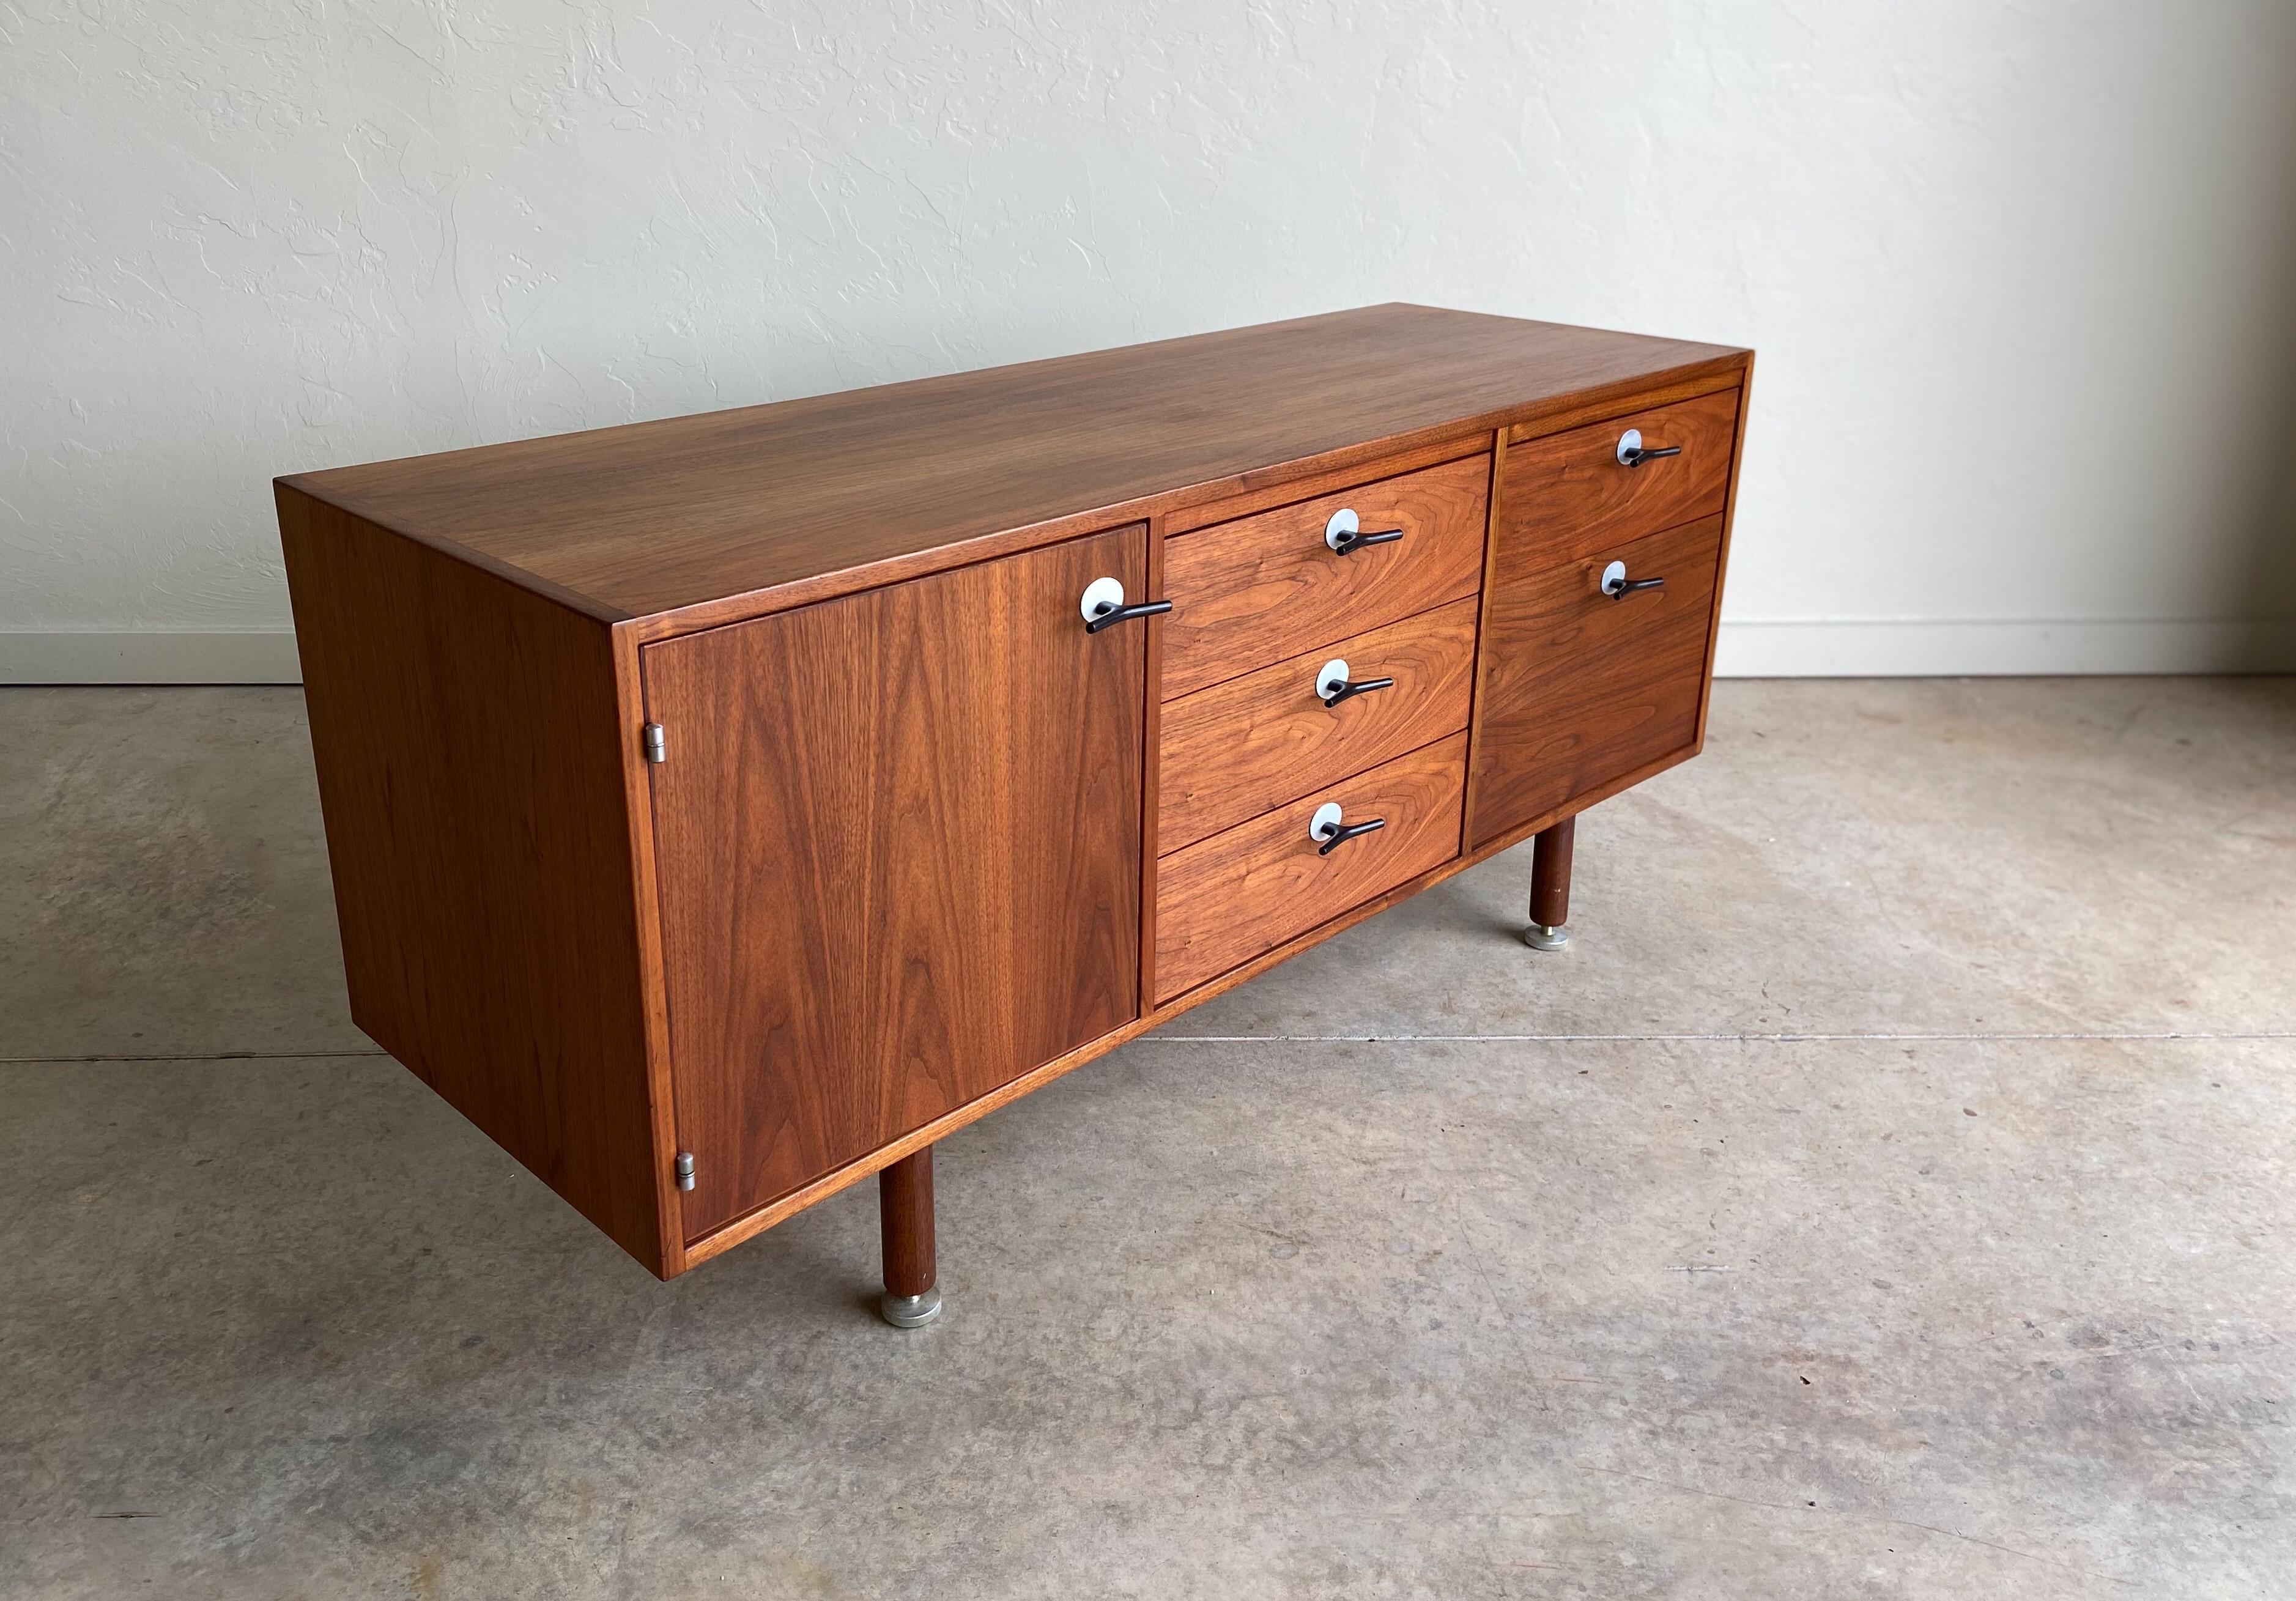 A smaller scale credenza designed by Jens Risom for Jens Risom Design Inc. Features amazing walnut grain that is finished on all sides. This version has the desirable and more rare aluminum “Y” pulls. Provides ample storage with various drawer